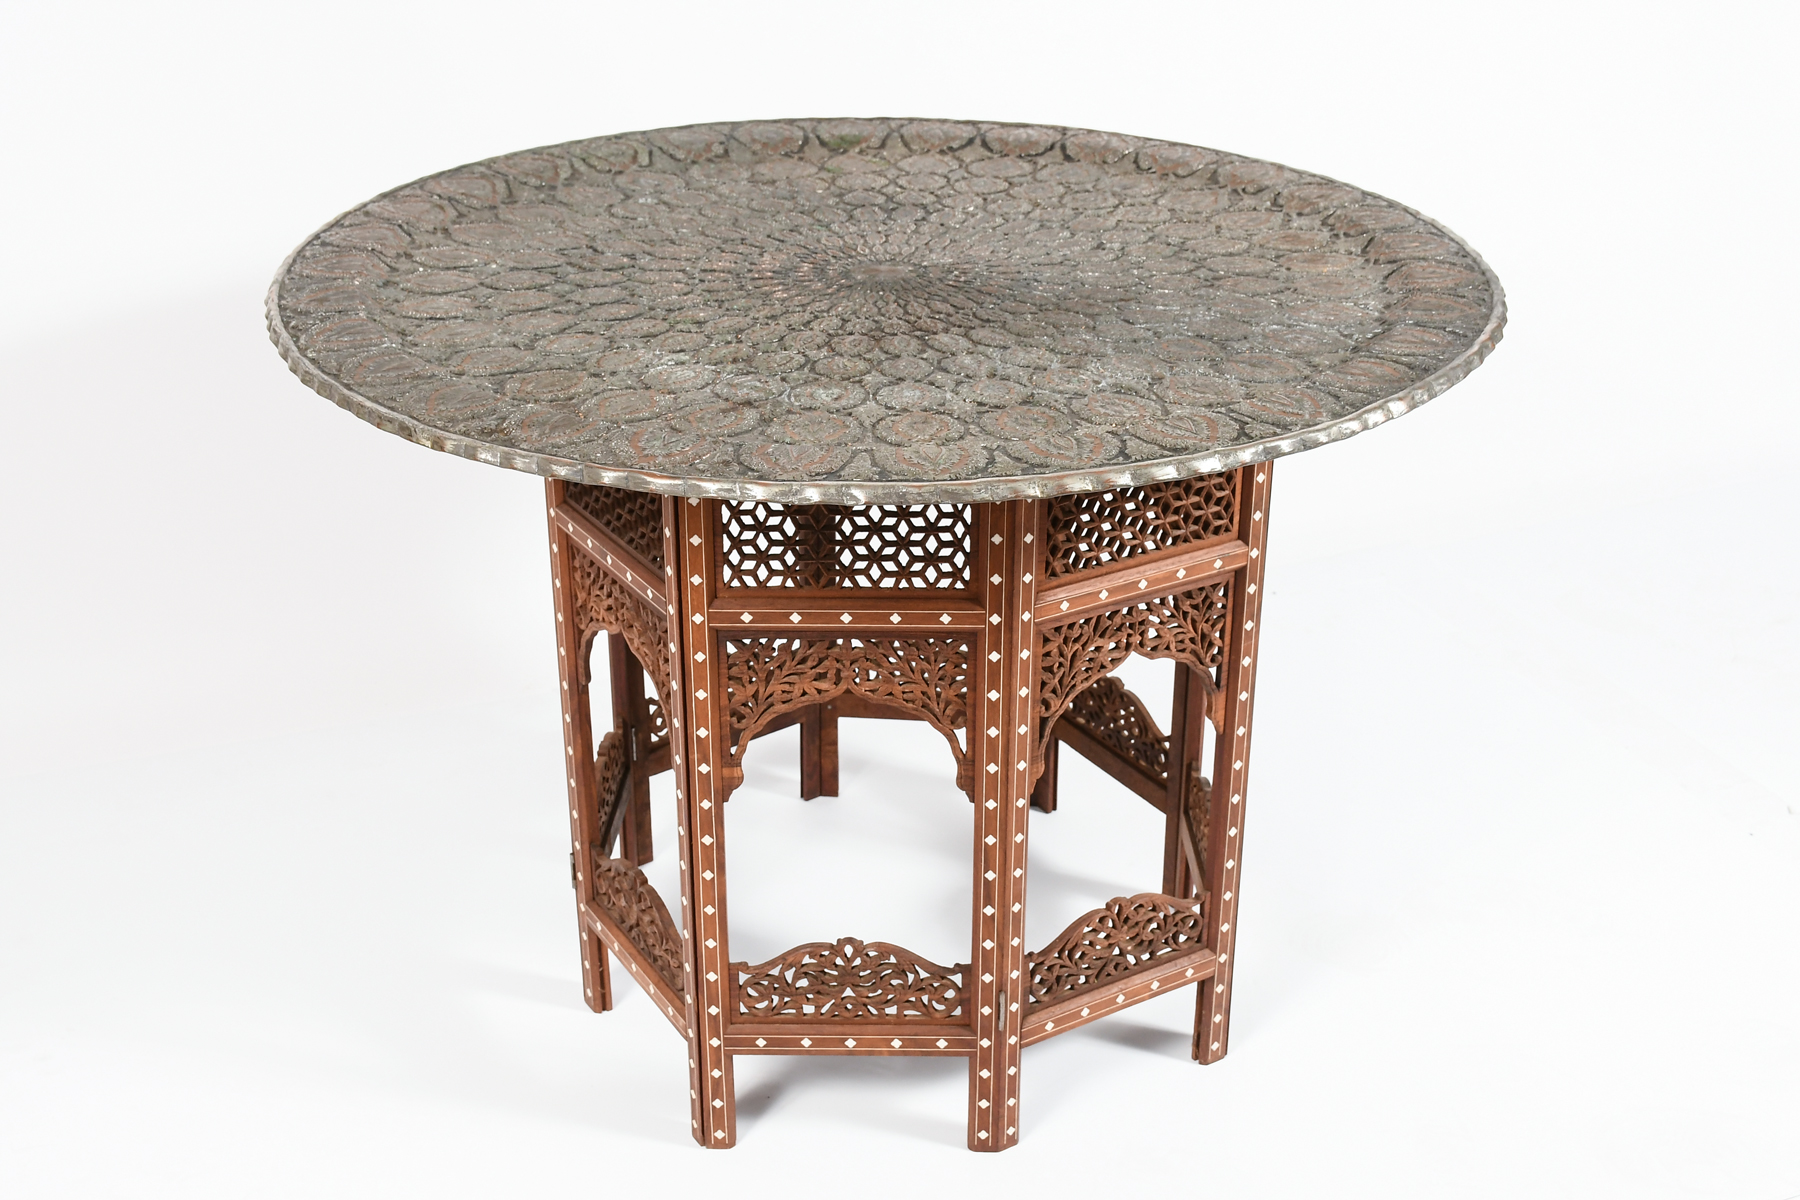 LARGE PERSIAN SILVERED COPPER TABLE